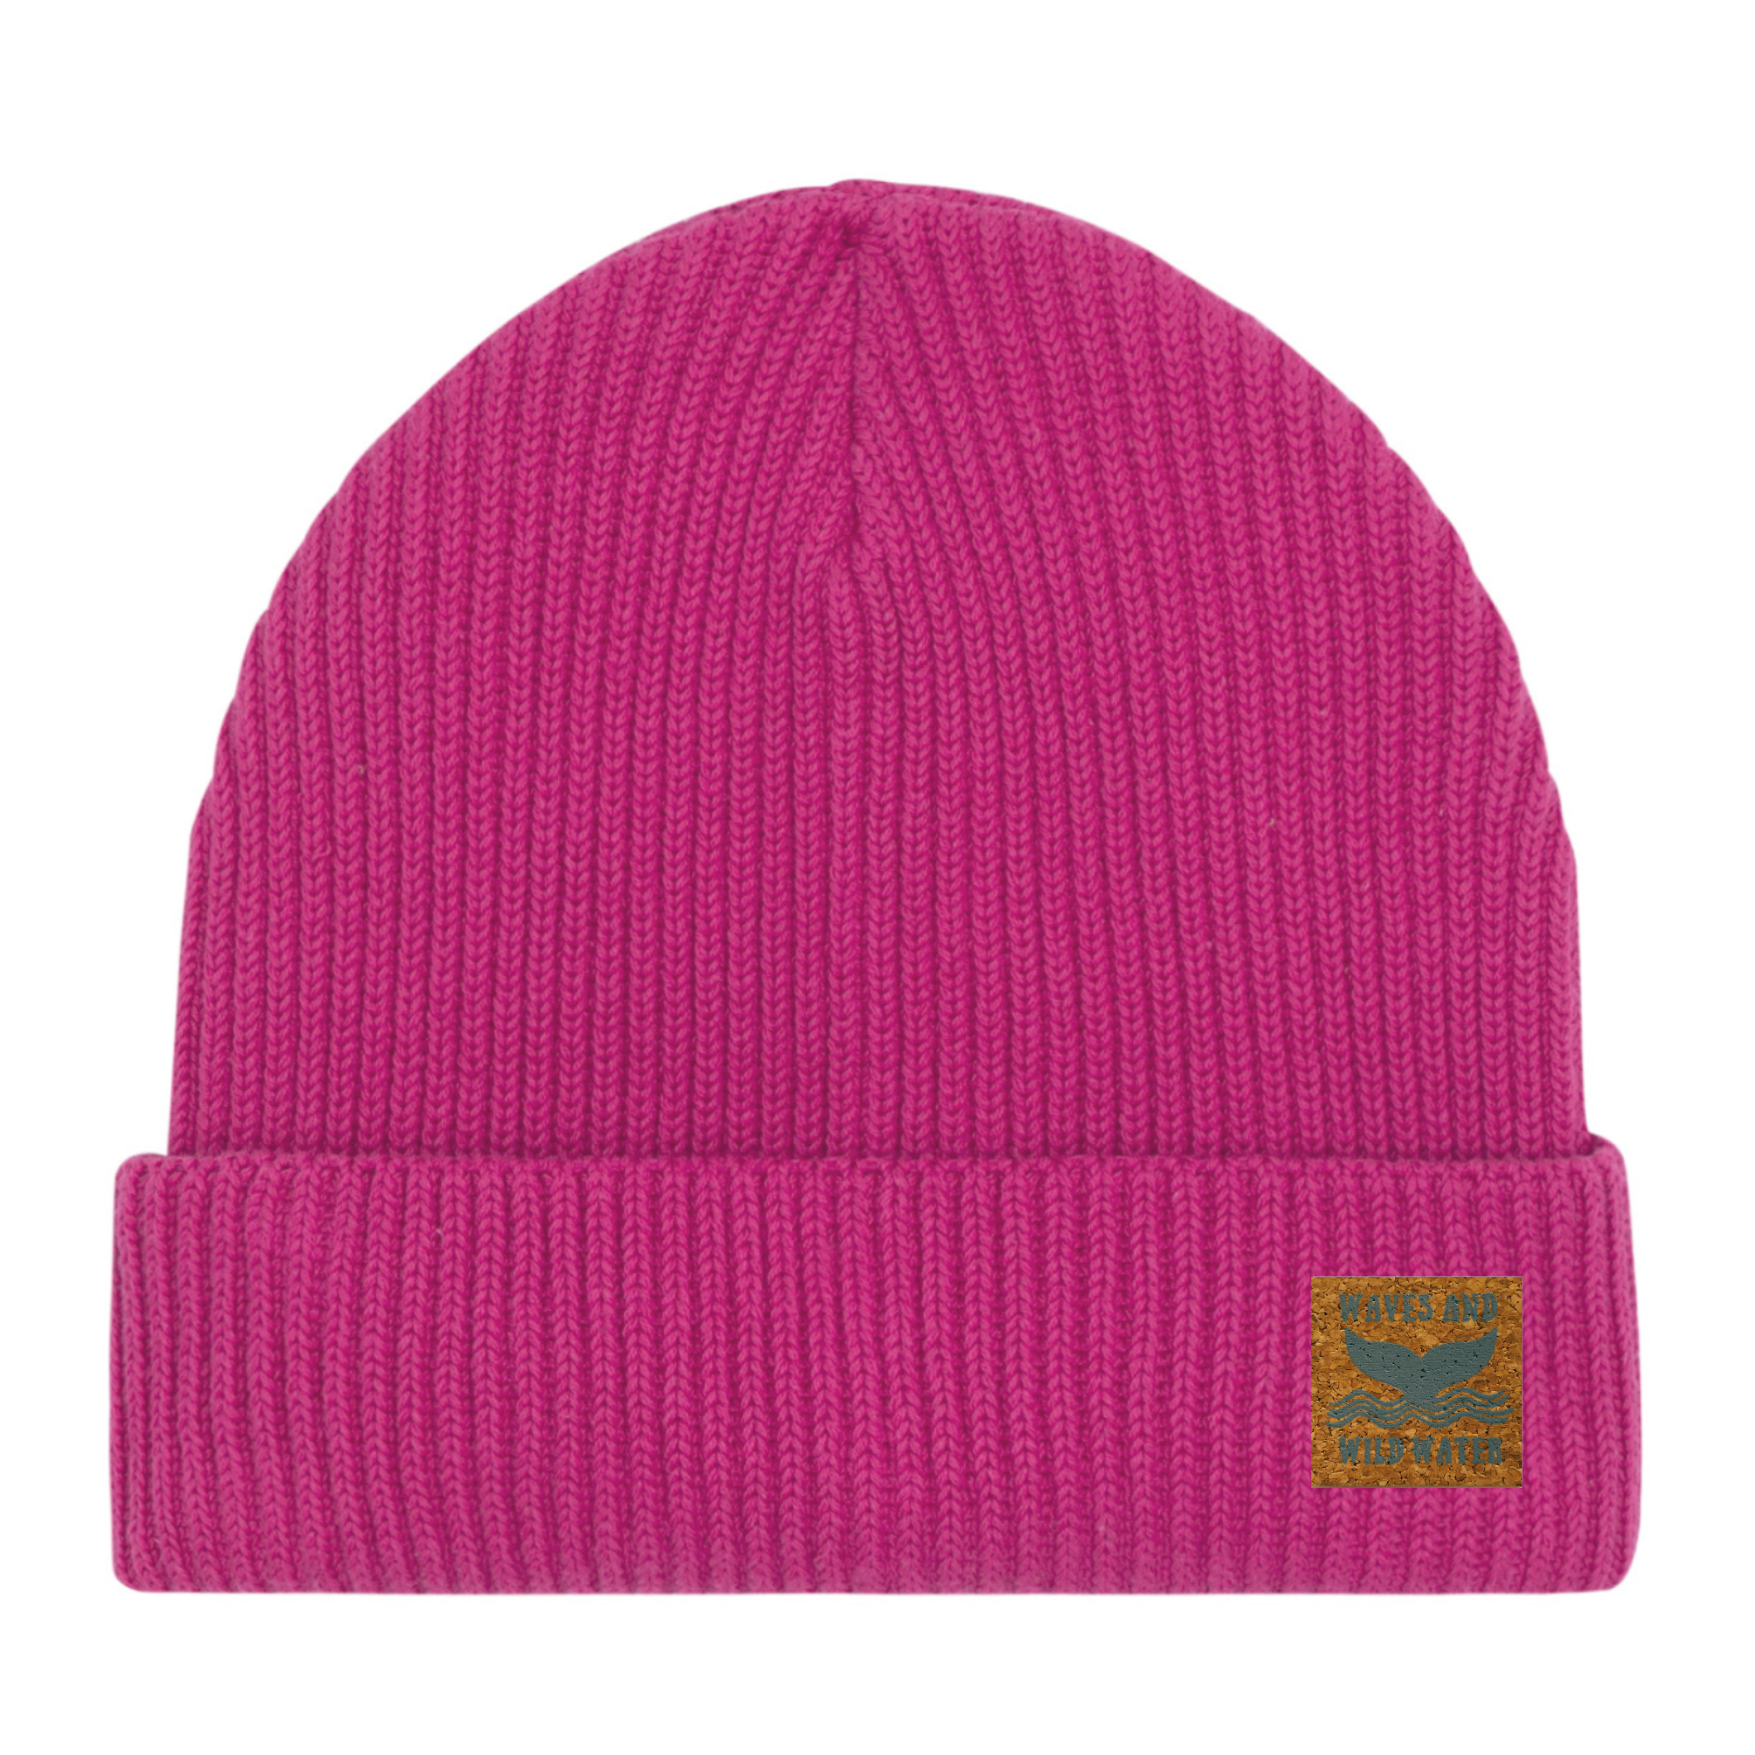 A bright pink fisherman beanie hat with a Waves & Wild Water label. 